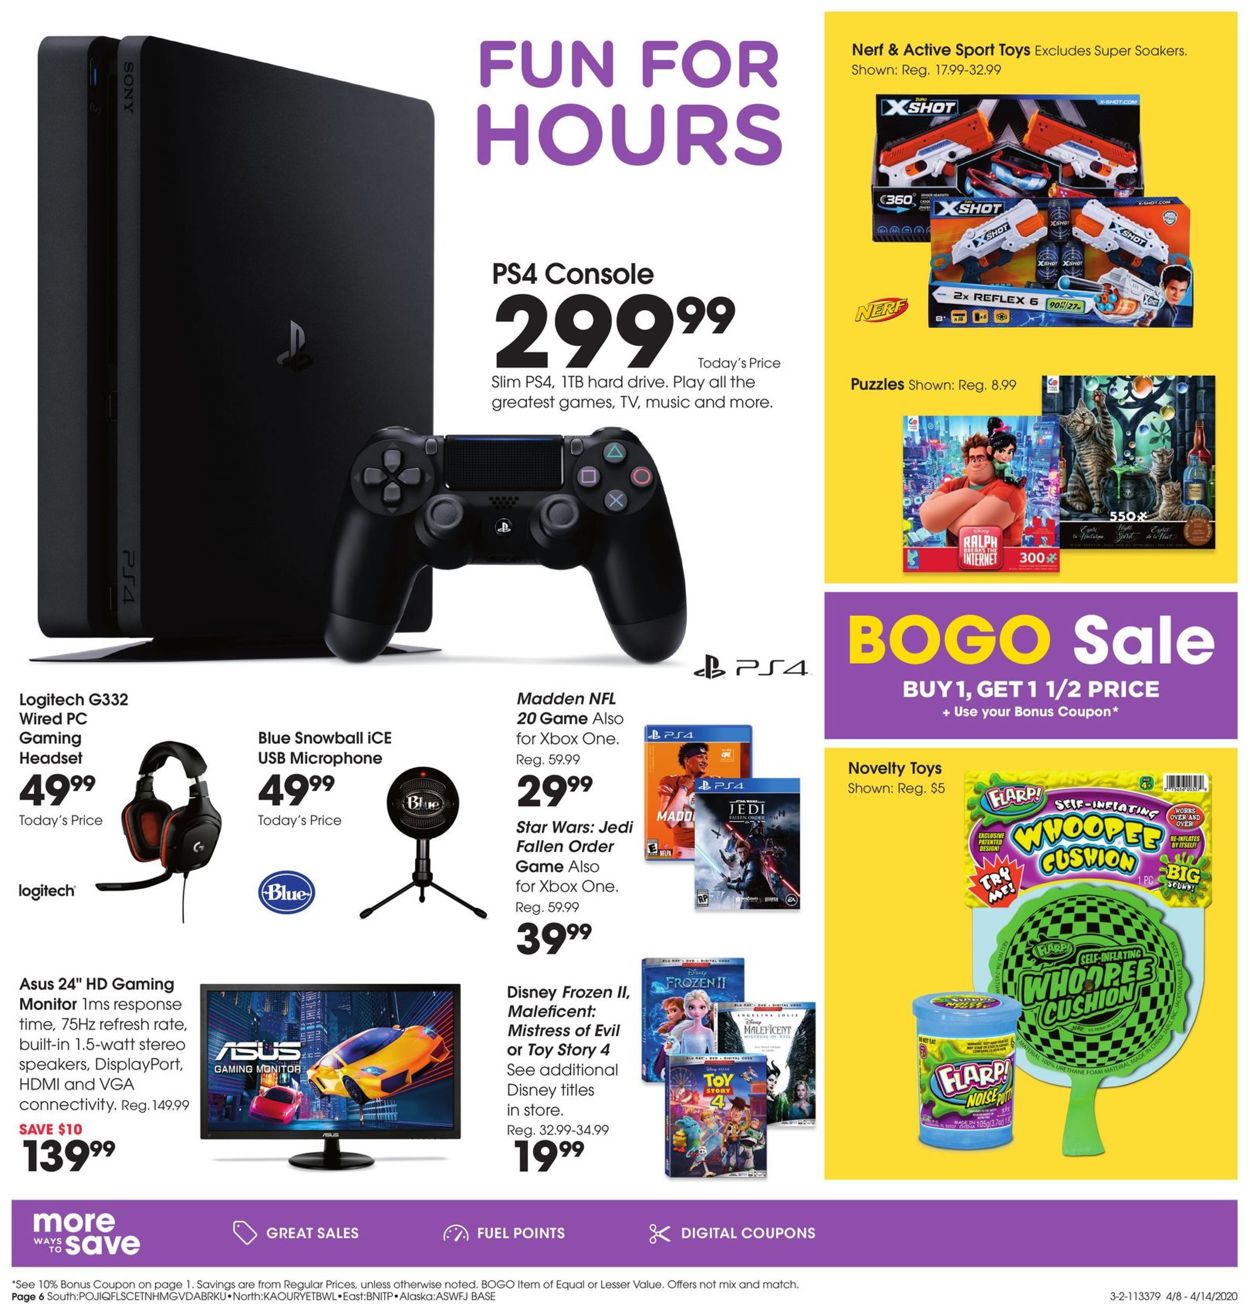 fred meyer ps4 pro